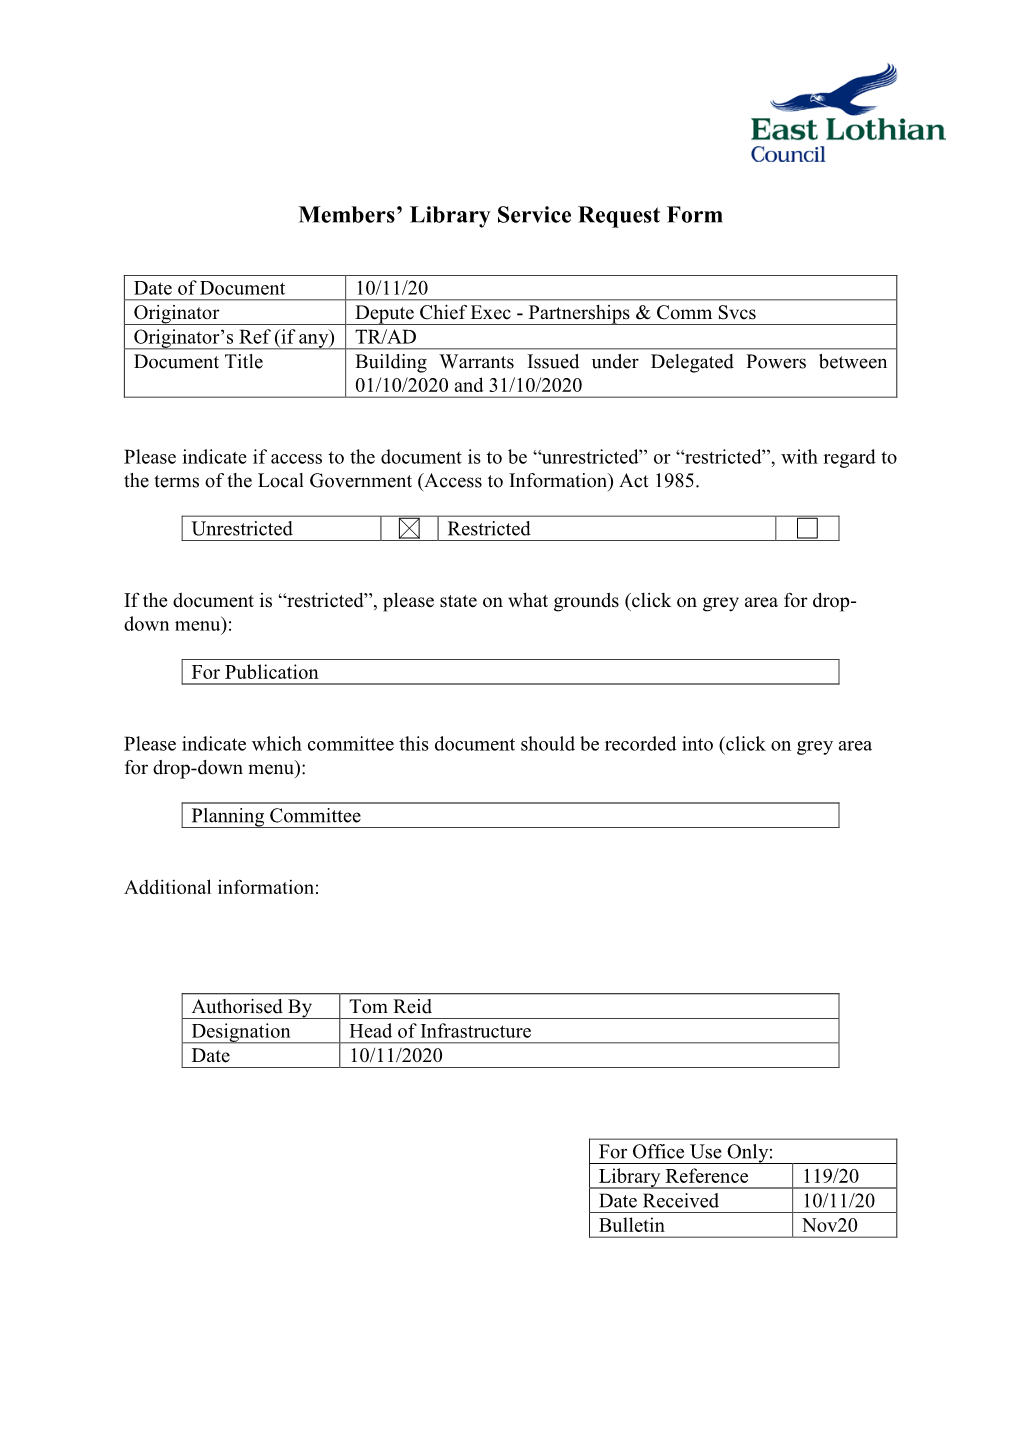 Members' Library Service Request Form